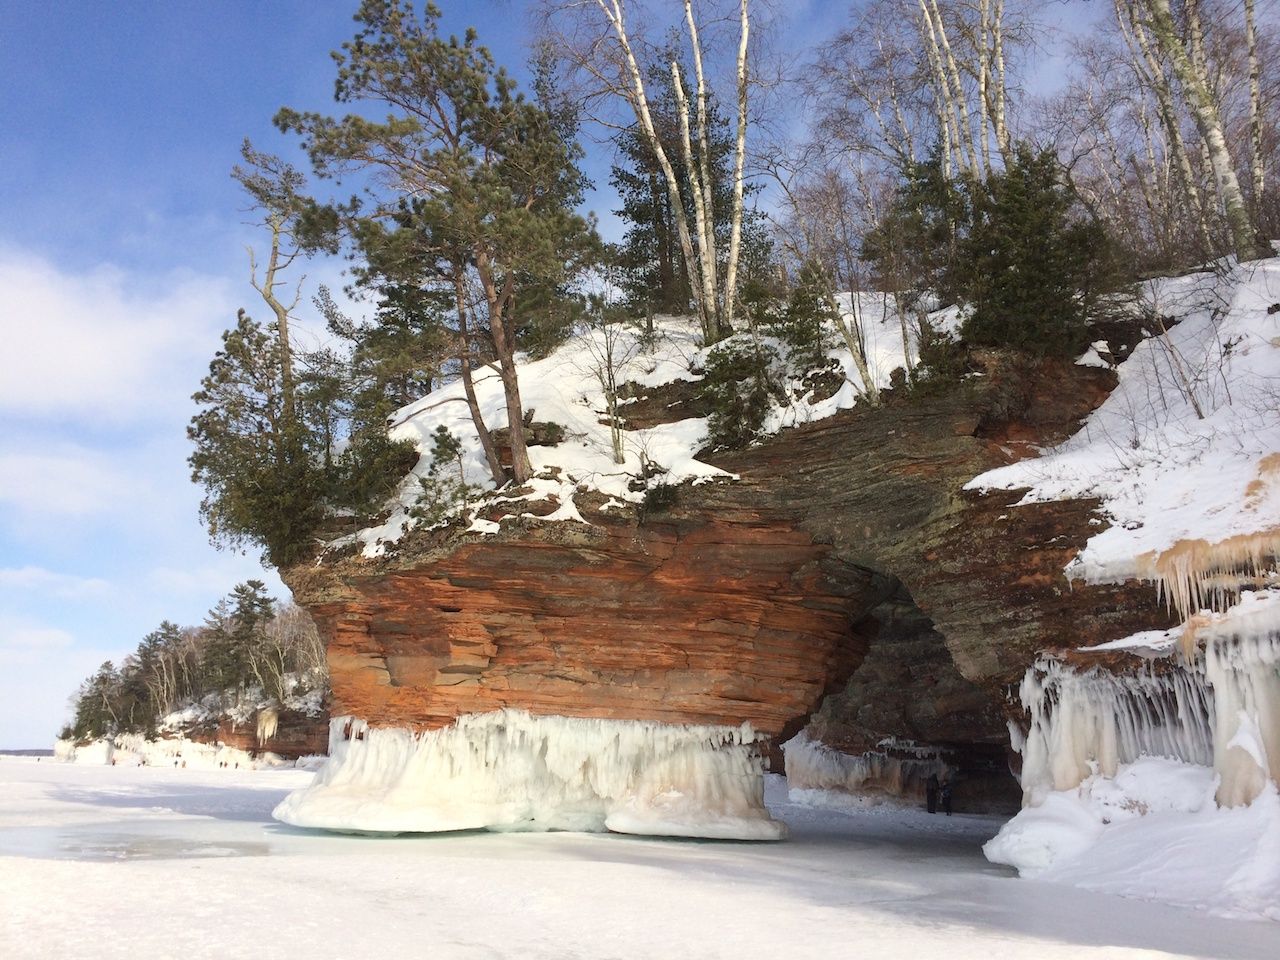 Apostle Islands National Lakeshore is one of the best places to snowshoe in the US